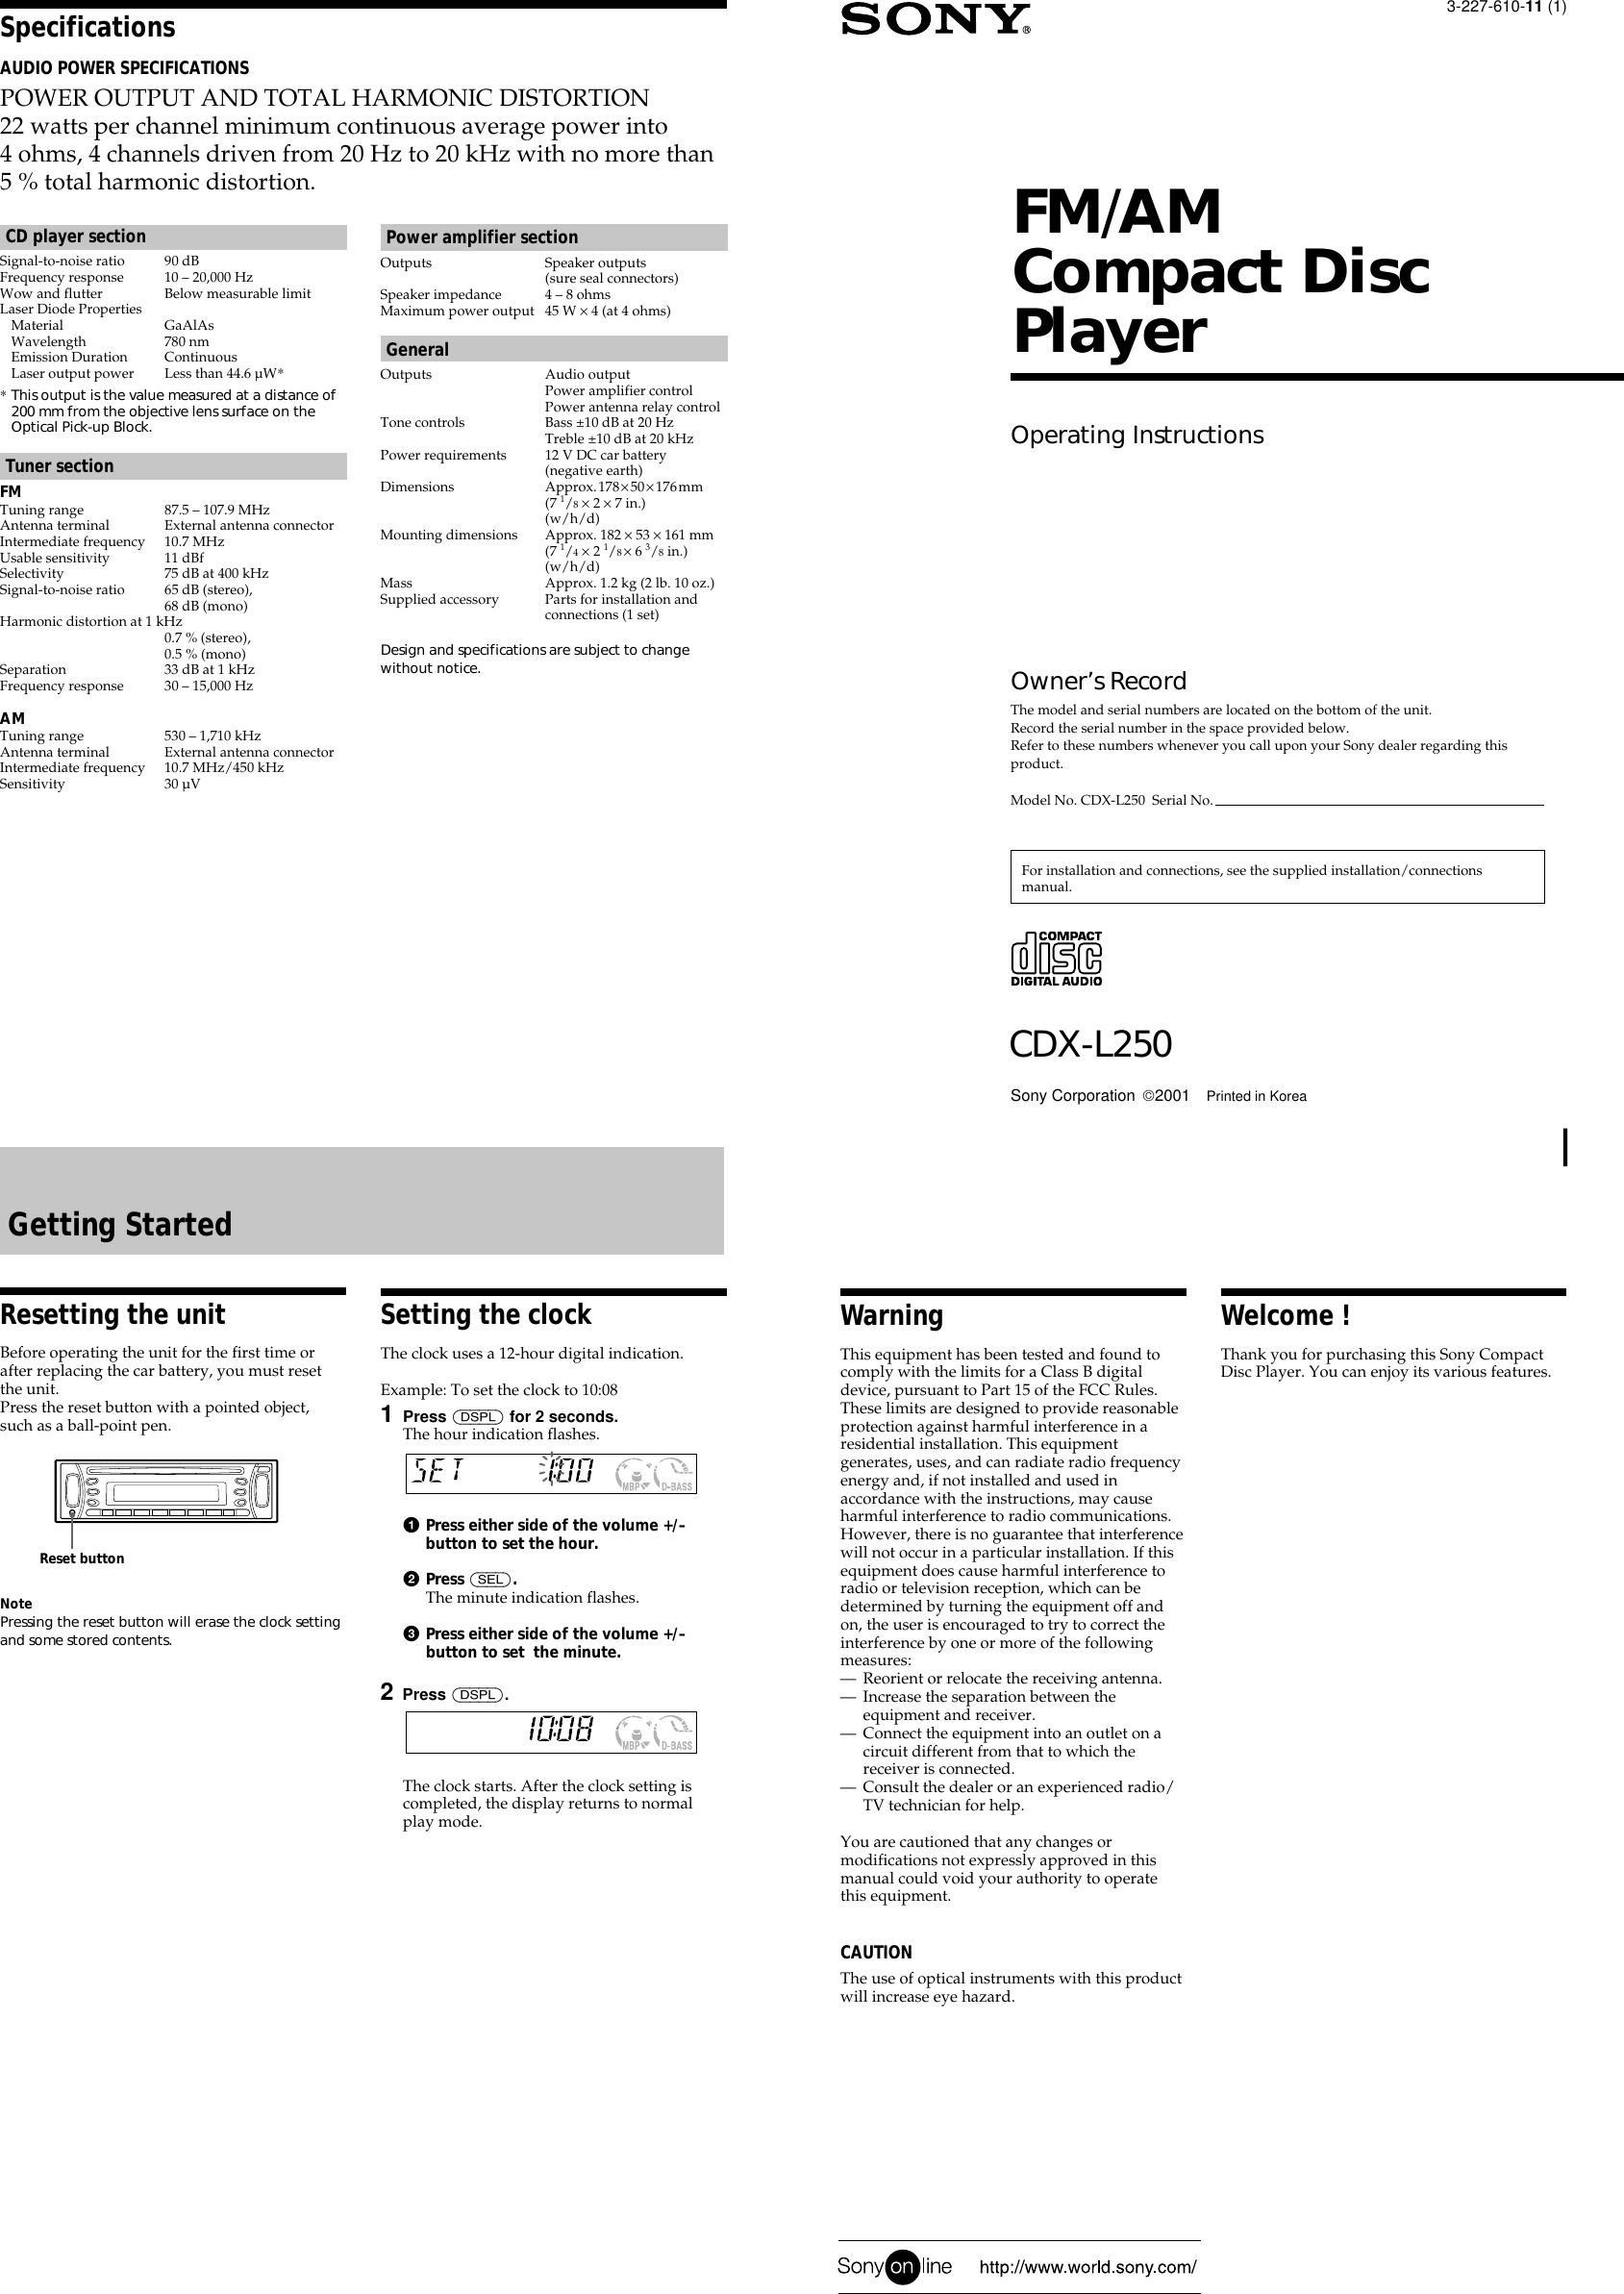 Page 1 of 4 - Sony Sony-Cdx-L250-Users-Manual- CDX-L250  Sony-cdx-l250-users-manual